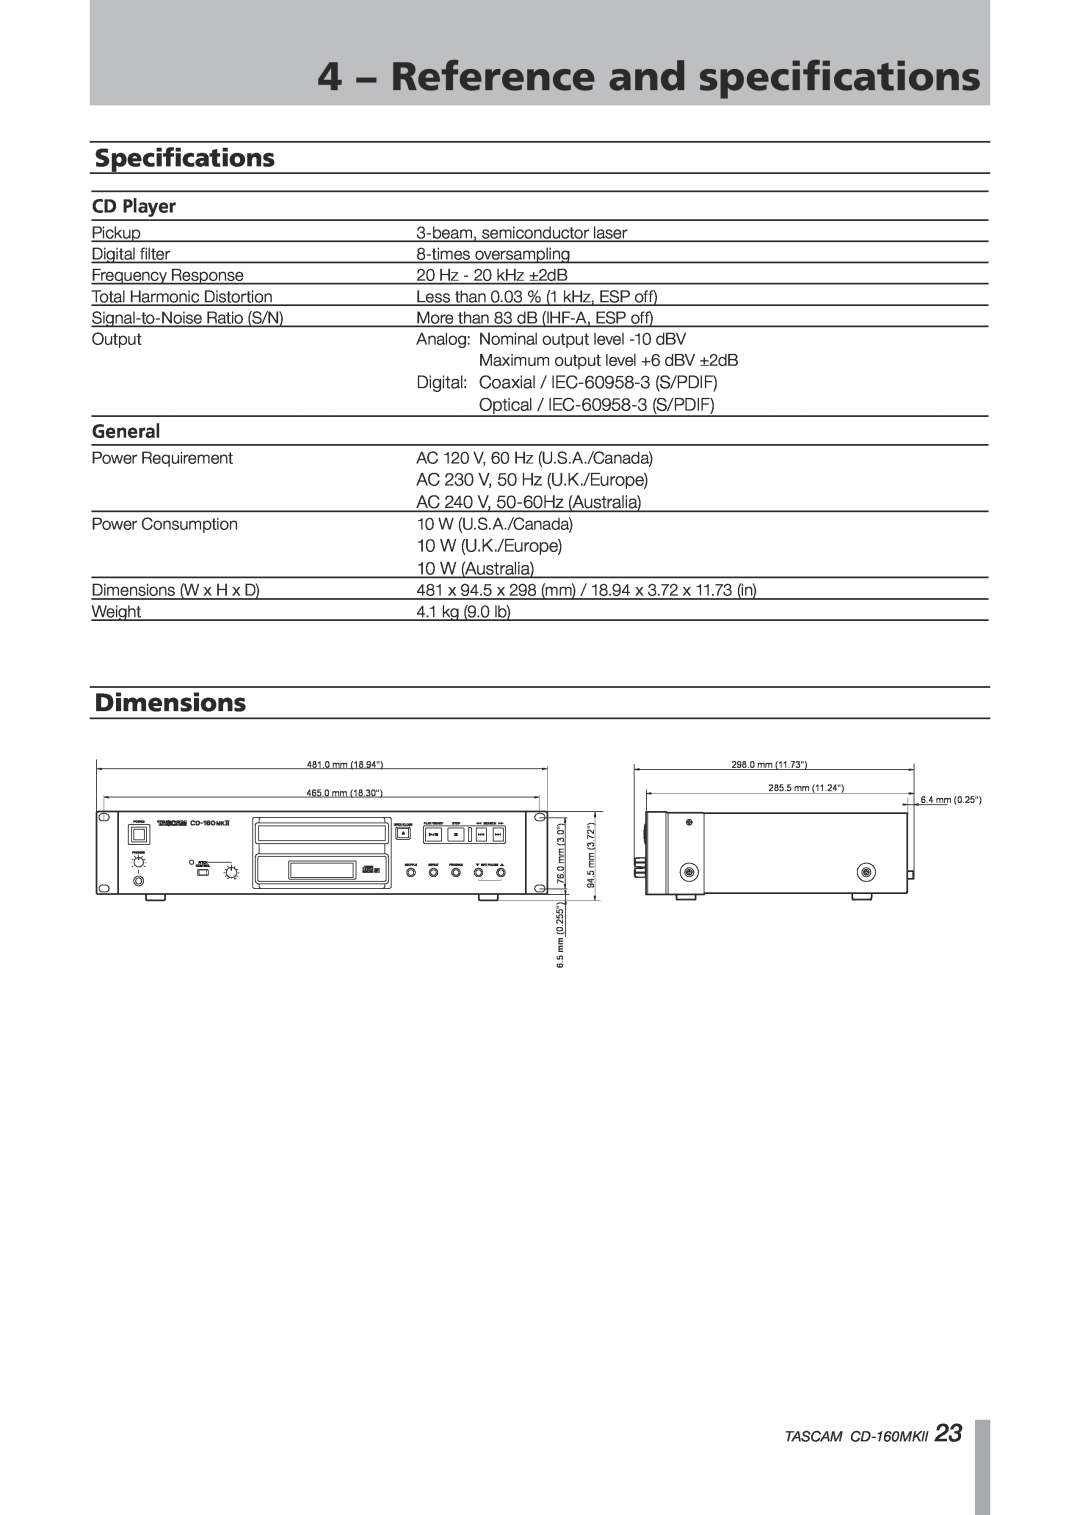 Tascam CD-160MKII owner manual Specifications, Dimensions, 4 − Reference and specifications, CD Player, General 